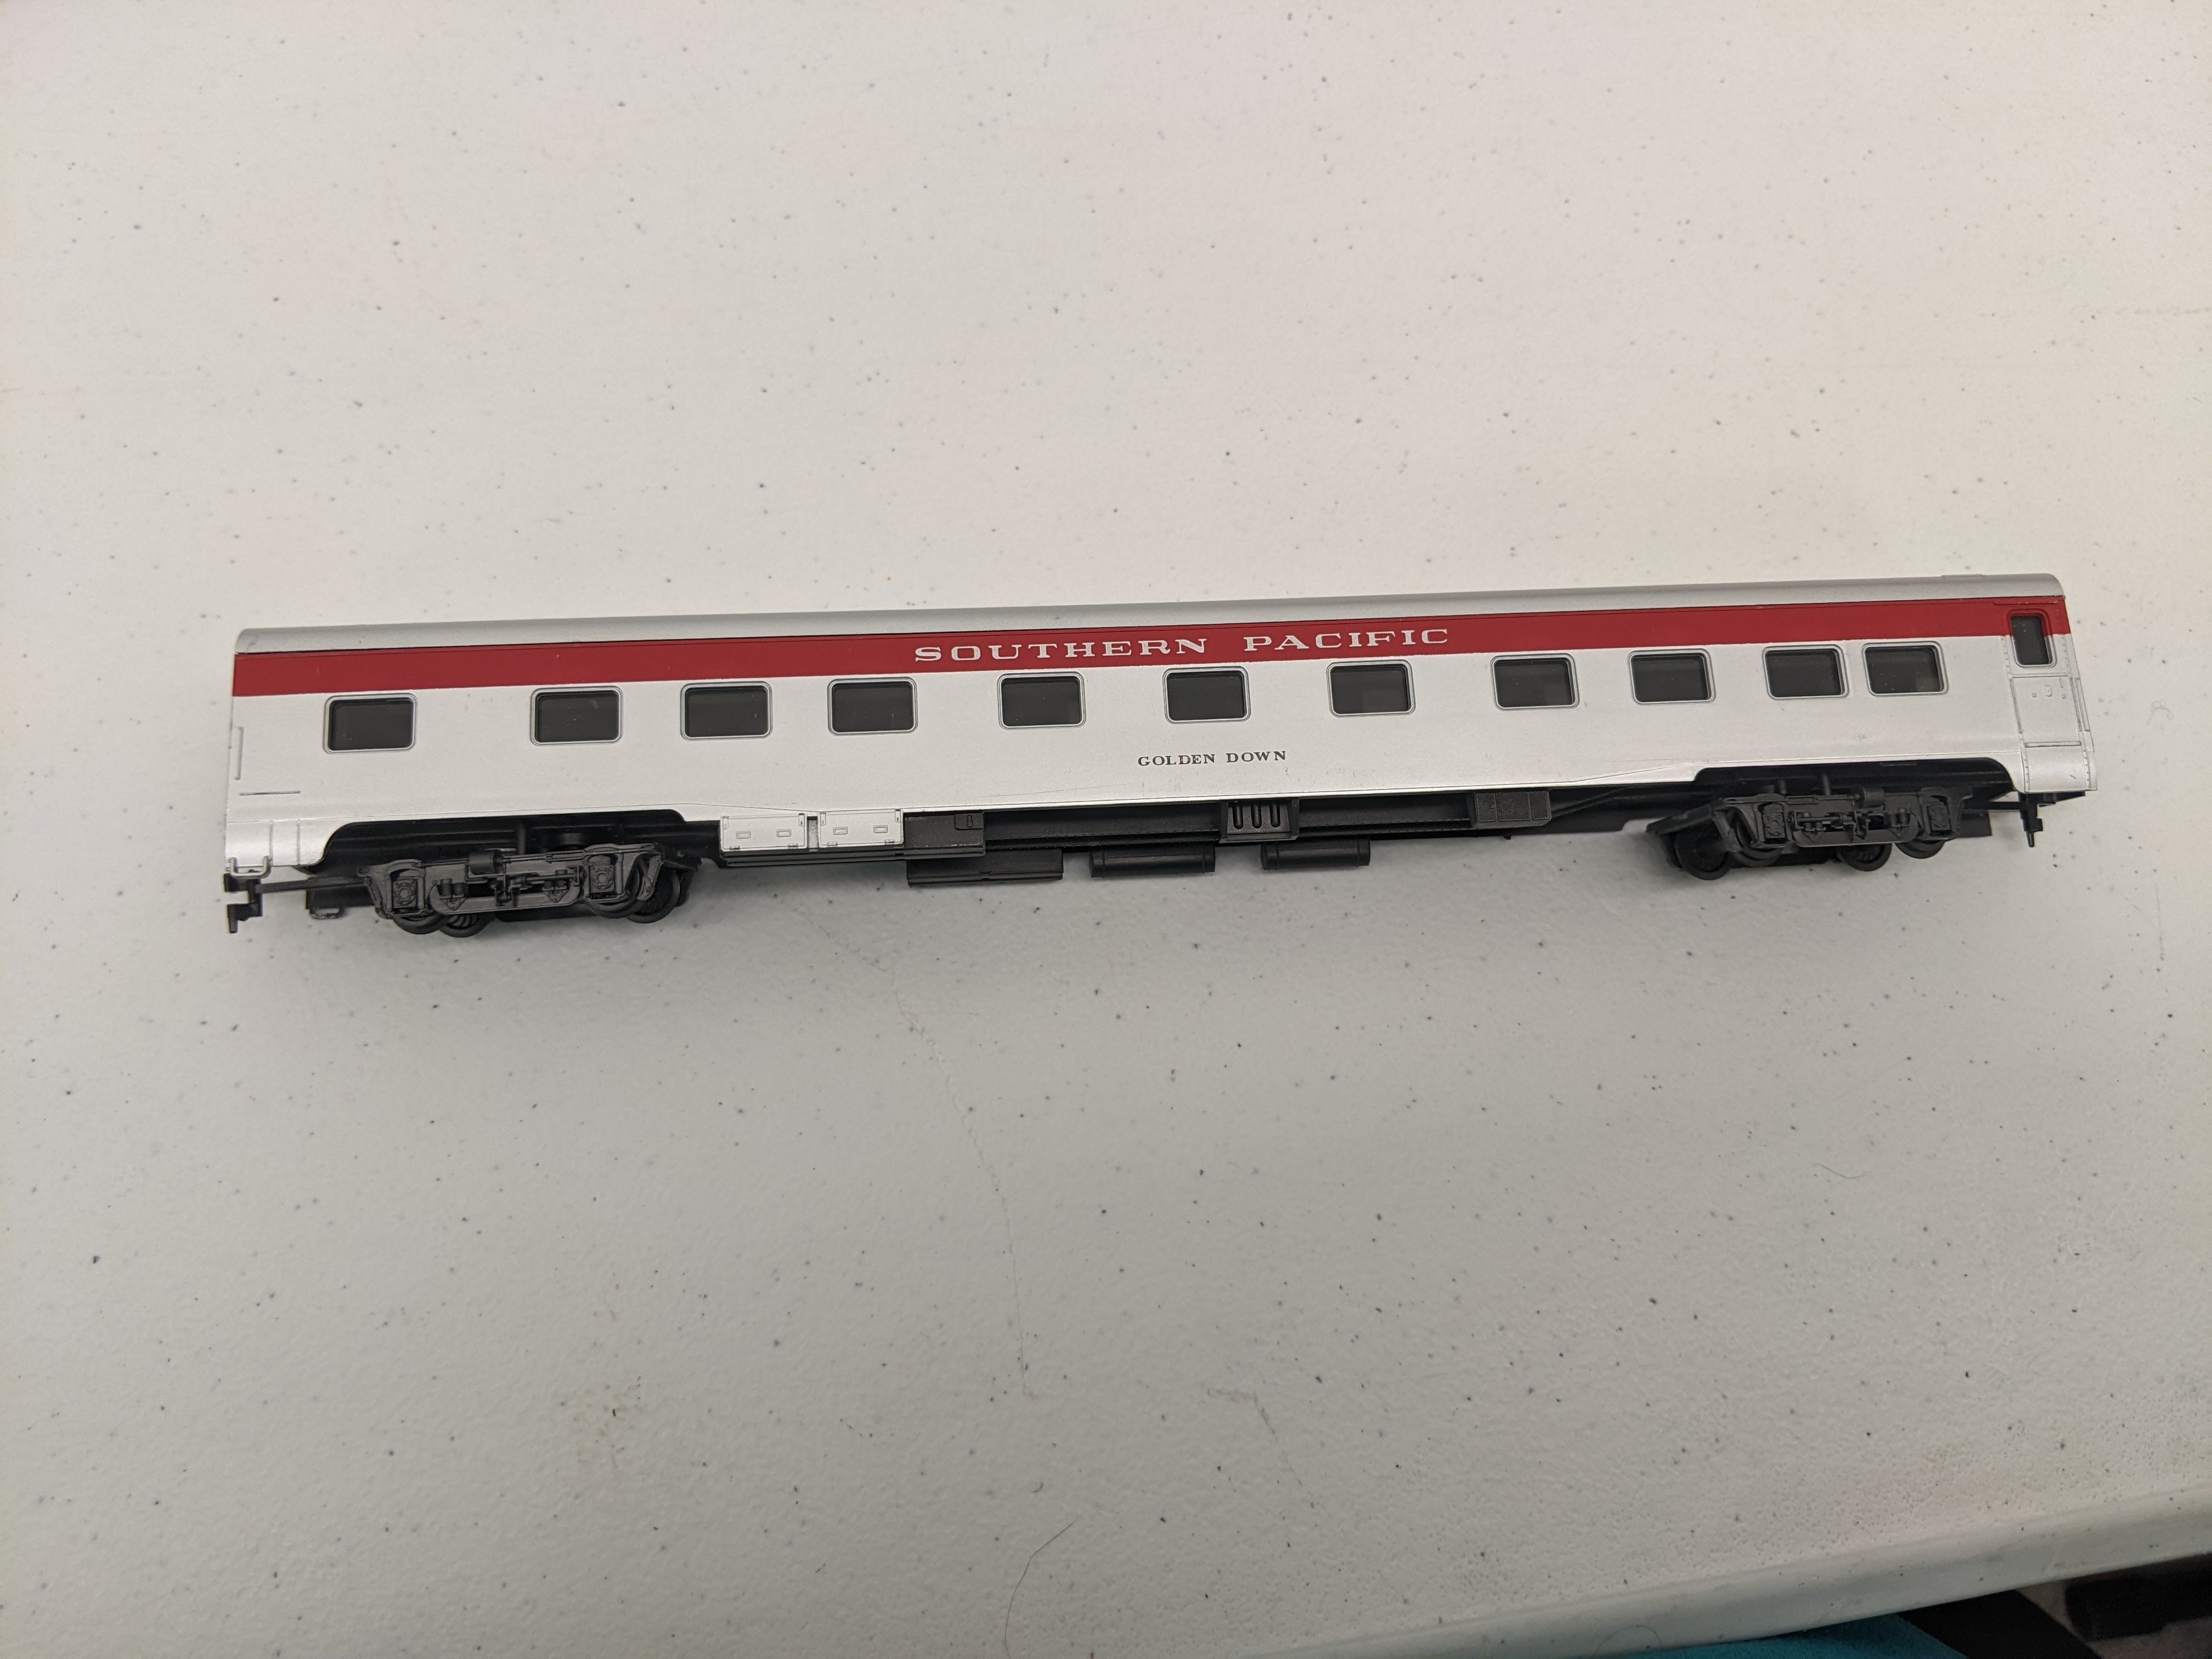 USED Rivarossi HO Scale, Passenger Car, Southern Pacific Golden Down